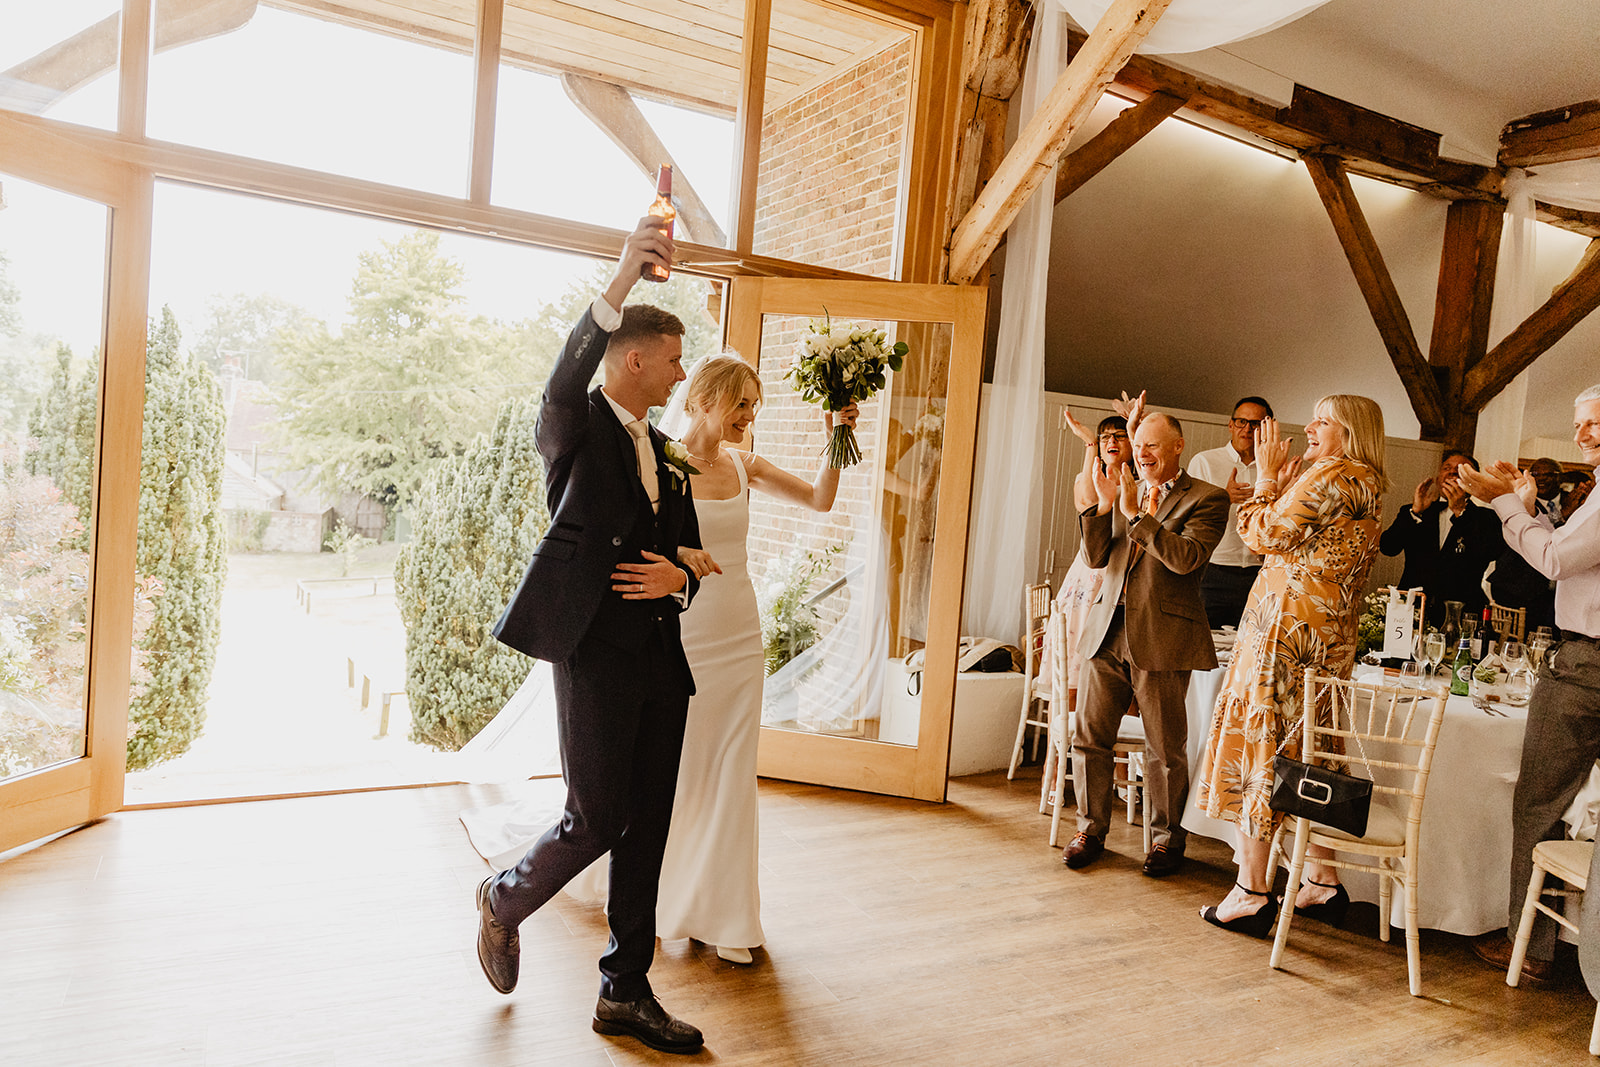 Bride and groom returning to reception venue at a Bury Manor Barn Wedding in Sussex. Photographer OliveJoy Photography.